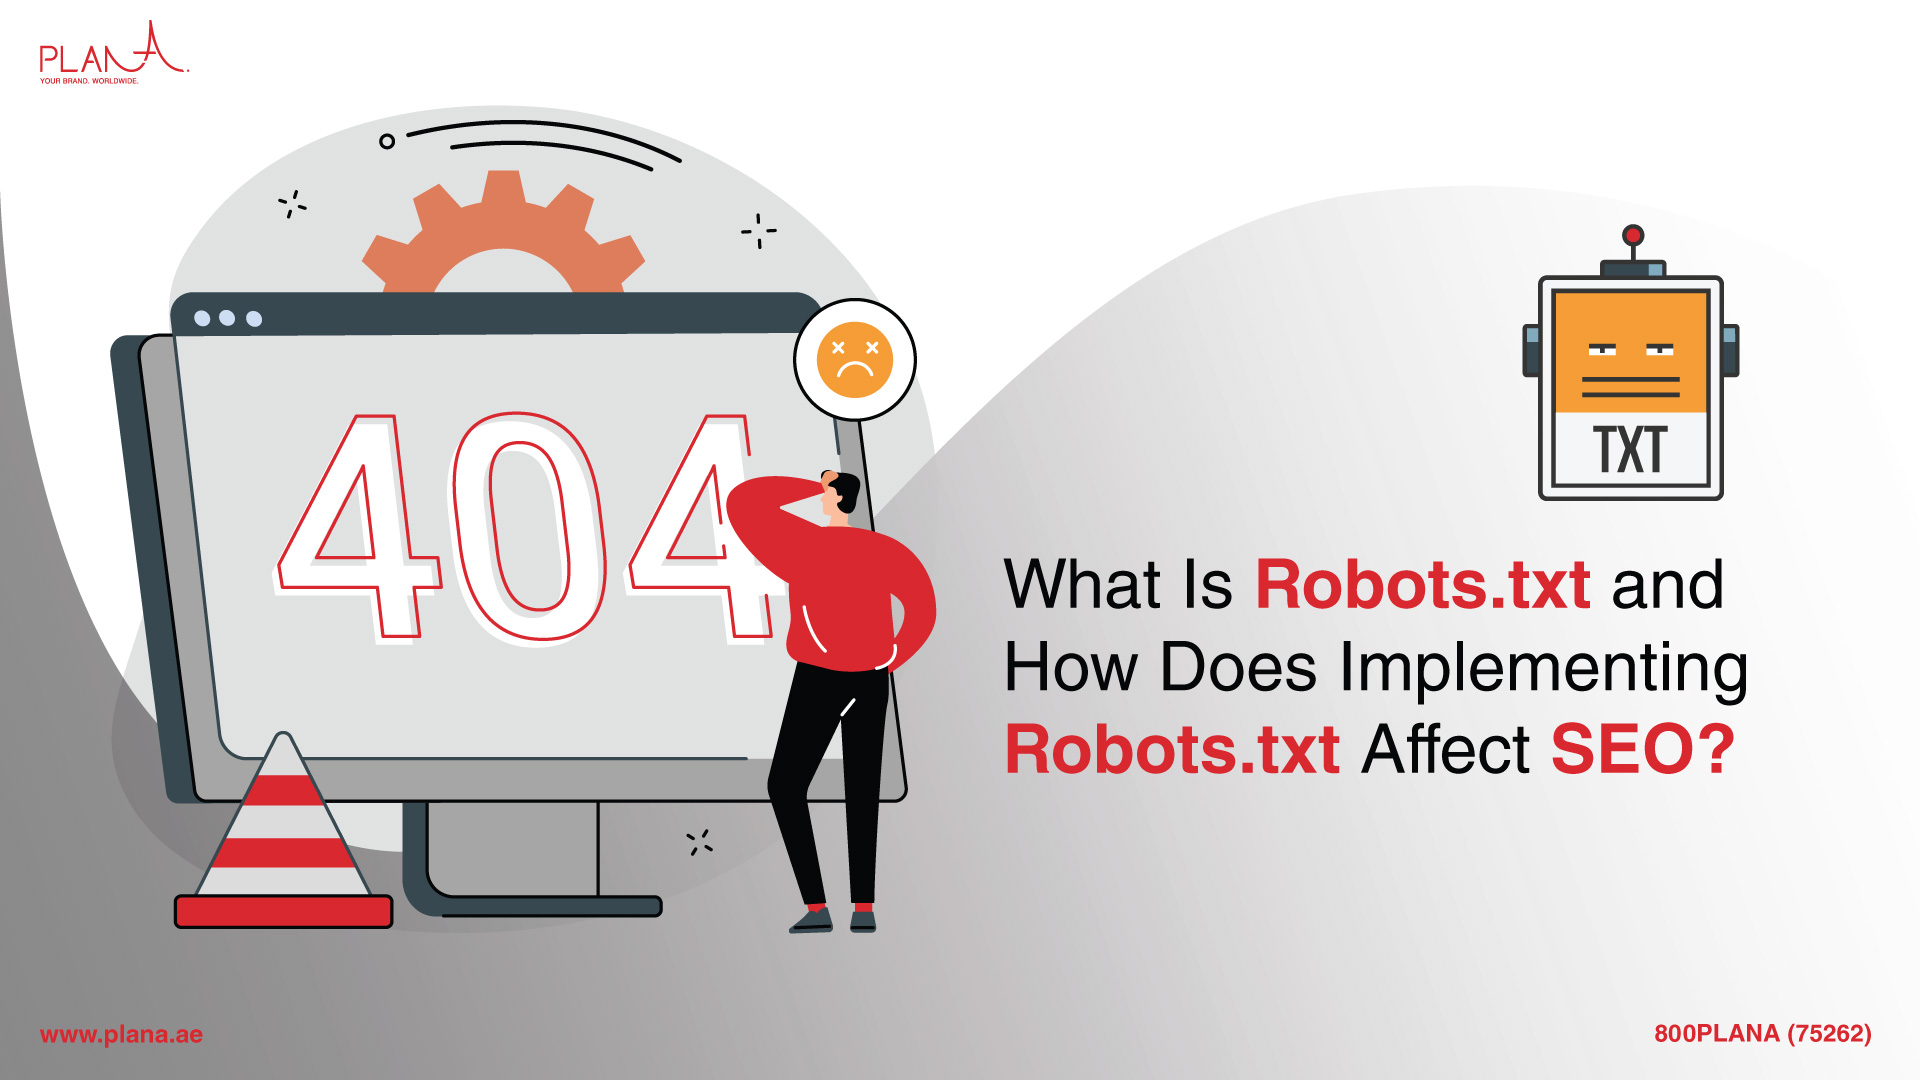 What Is Robots.txt and How Does Implementing Robots.txt Affect SEO?